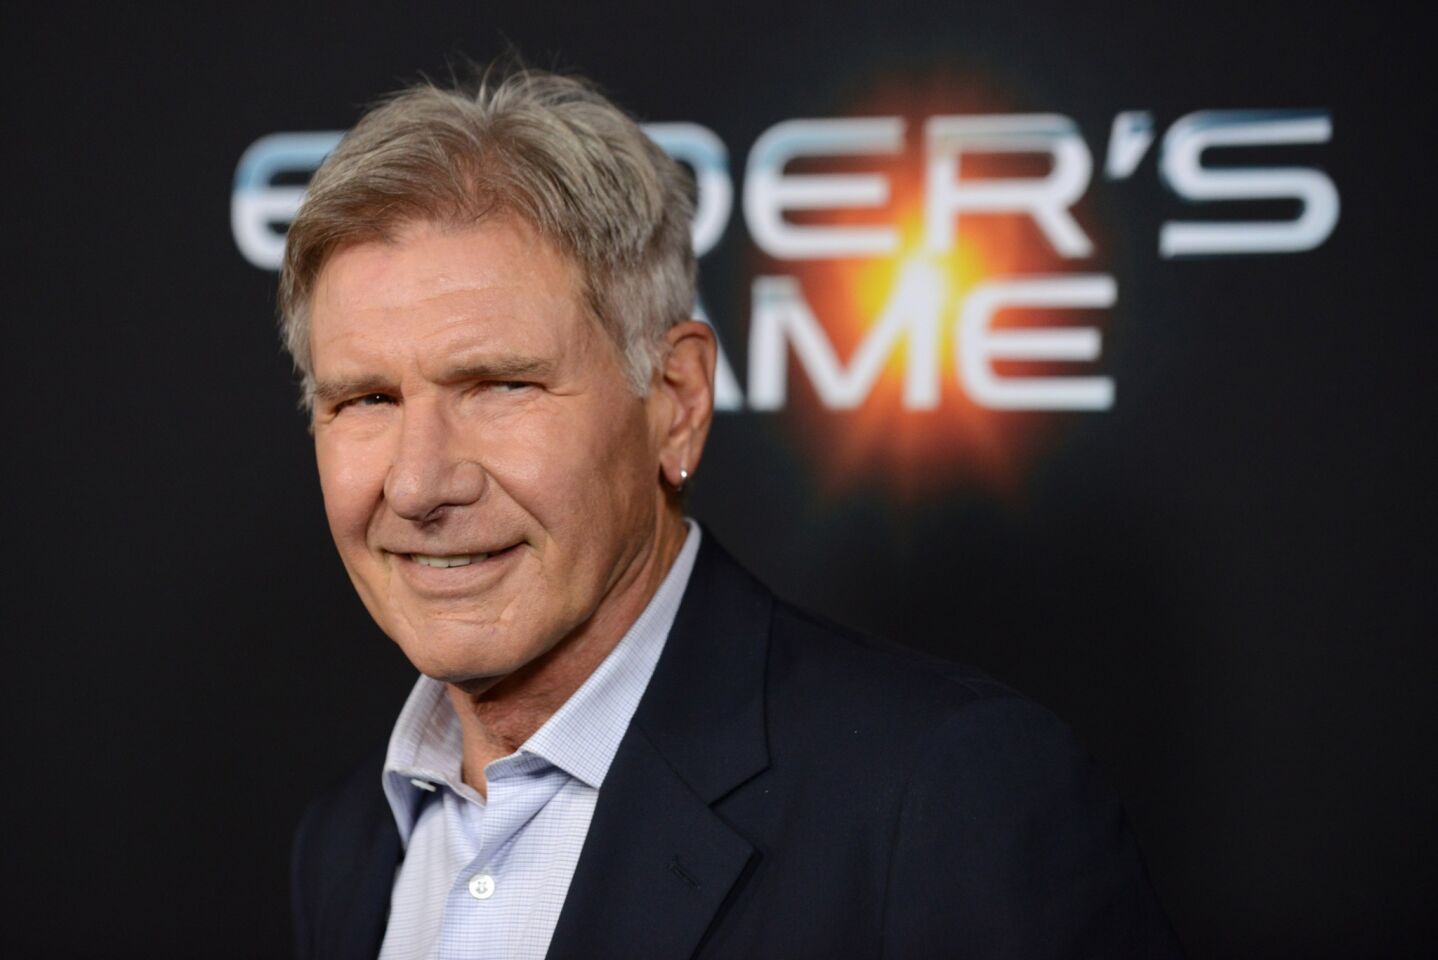 Harrison Ford arrives at the L.A. premiere of "Ender's Game."